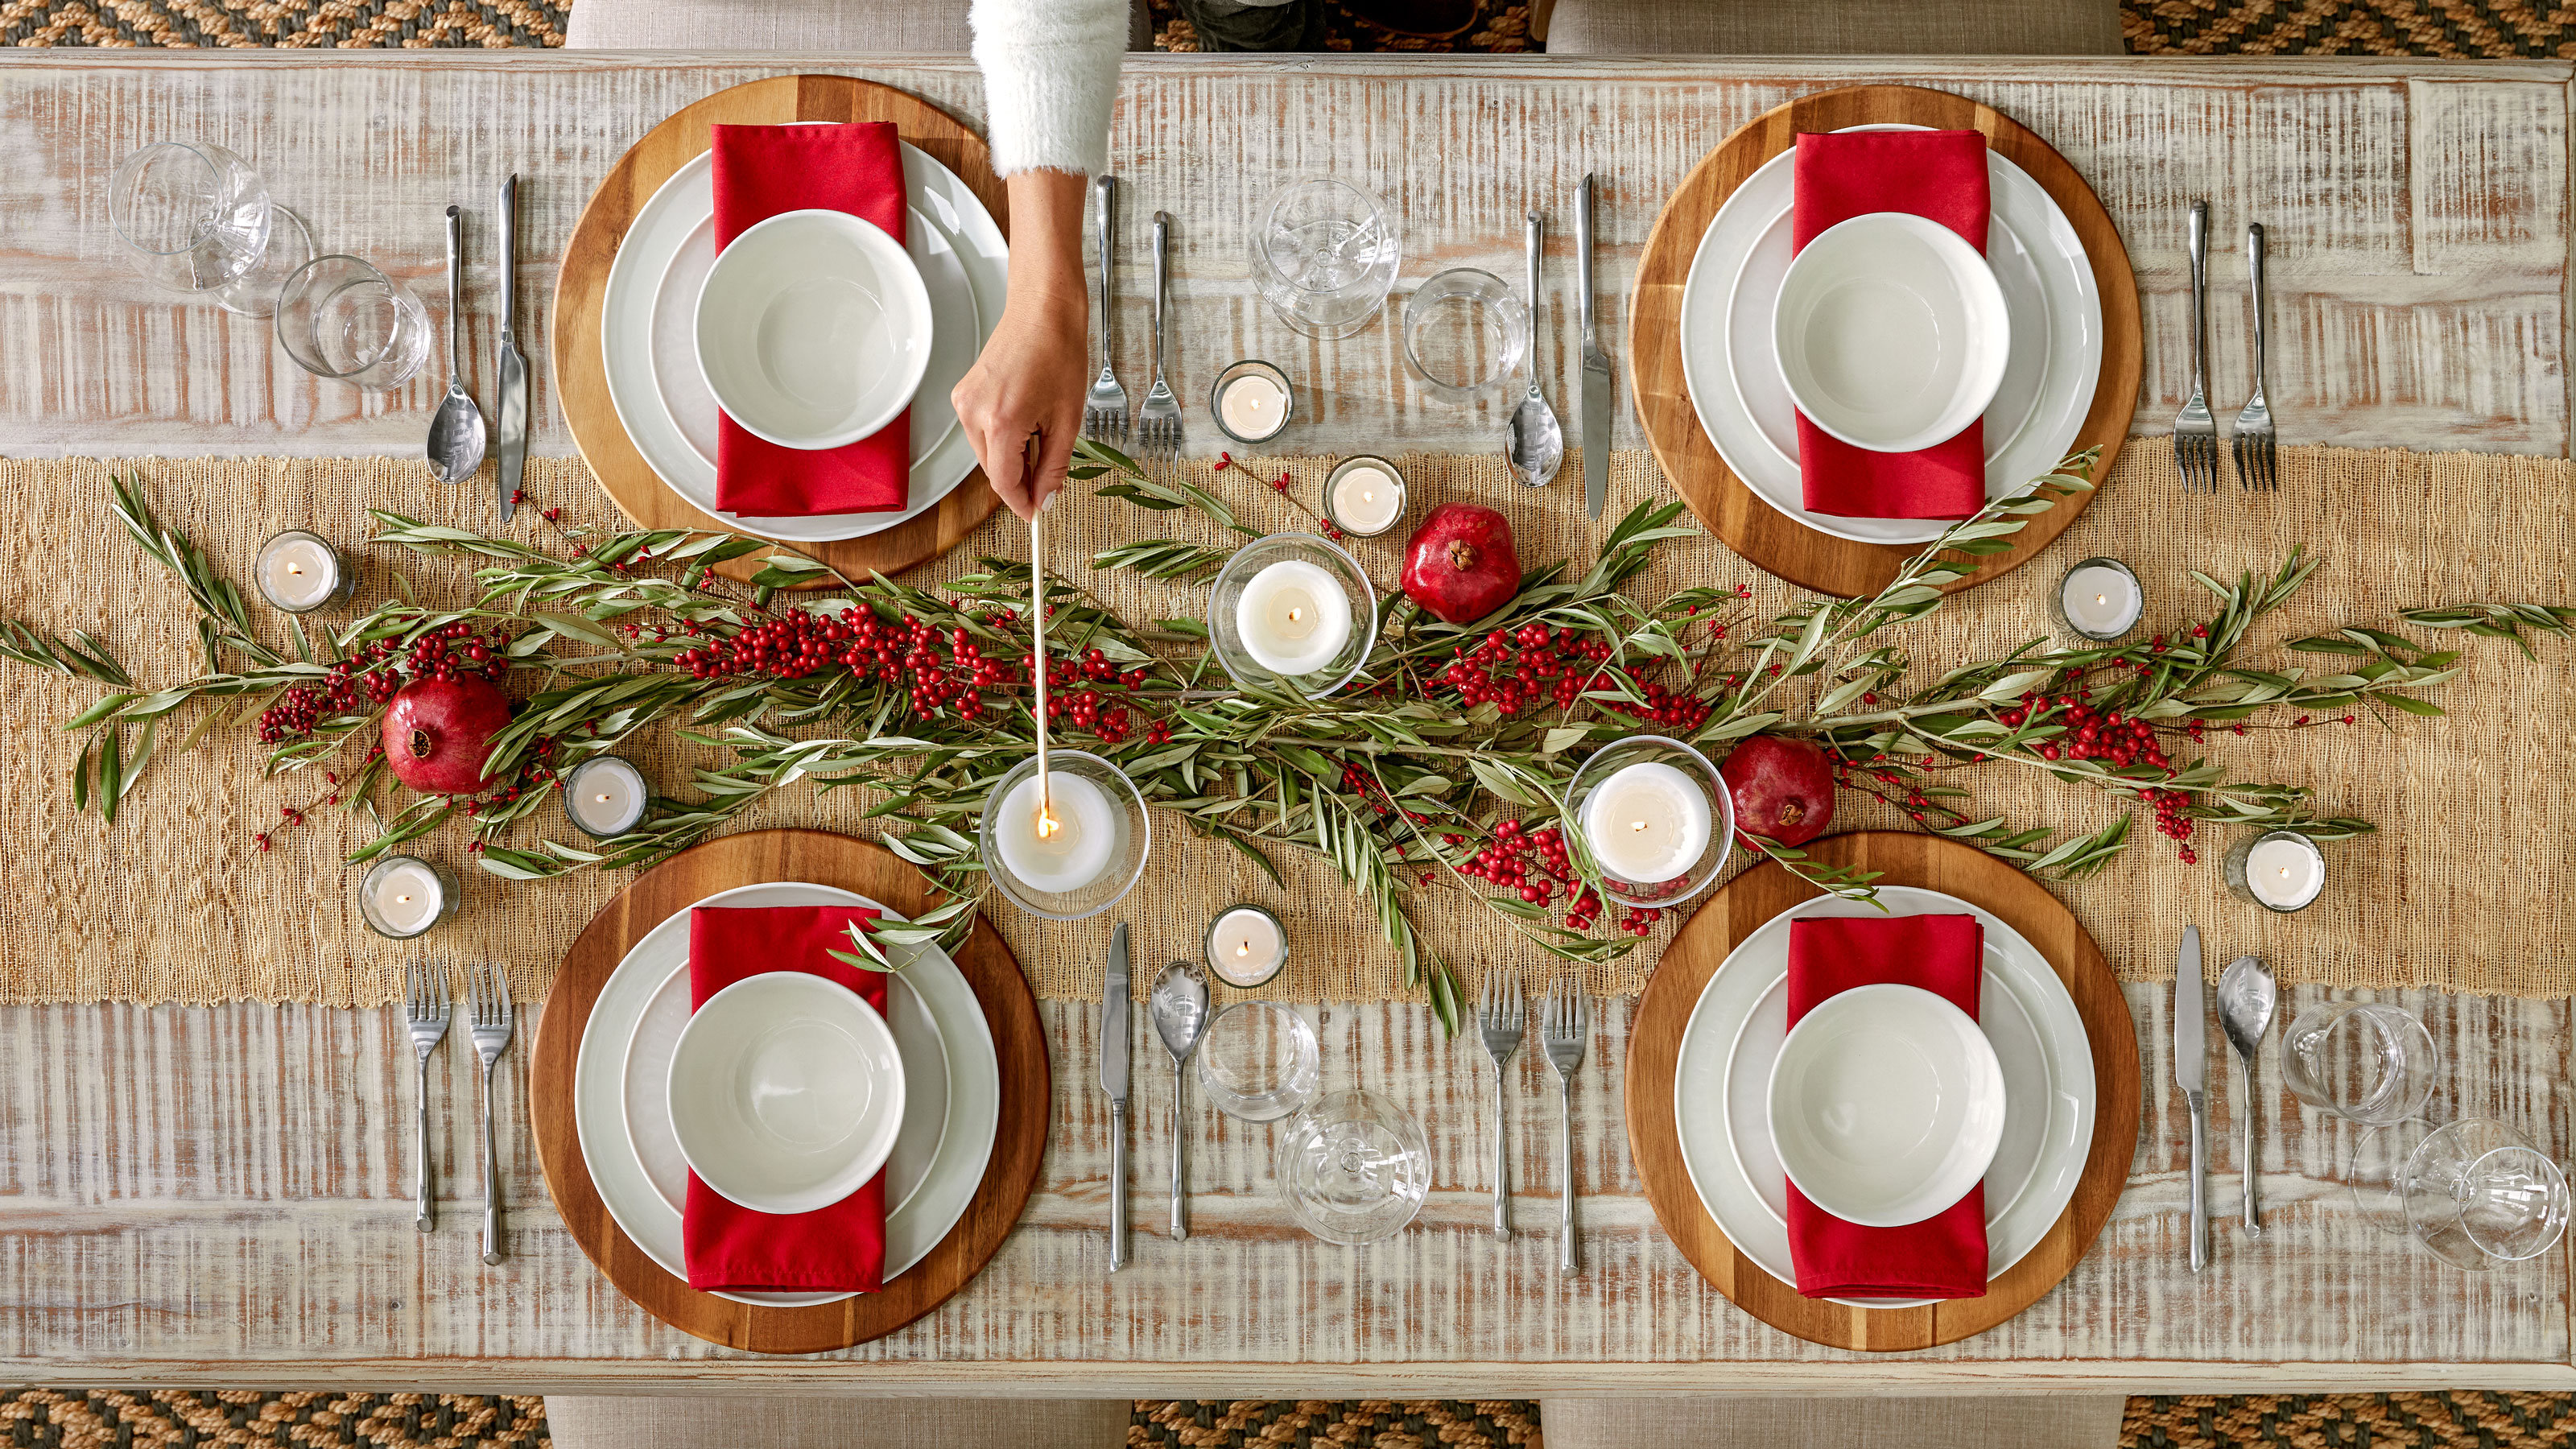 18 Christmas table settings and decor ideas that are beautifully ...